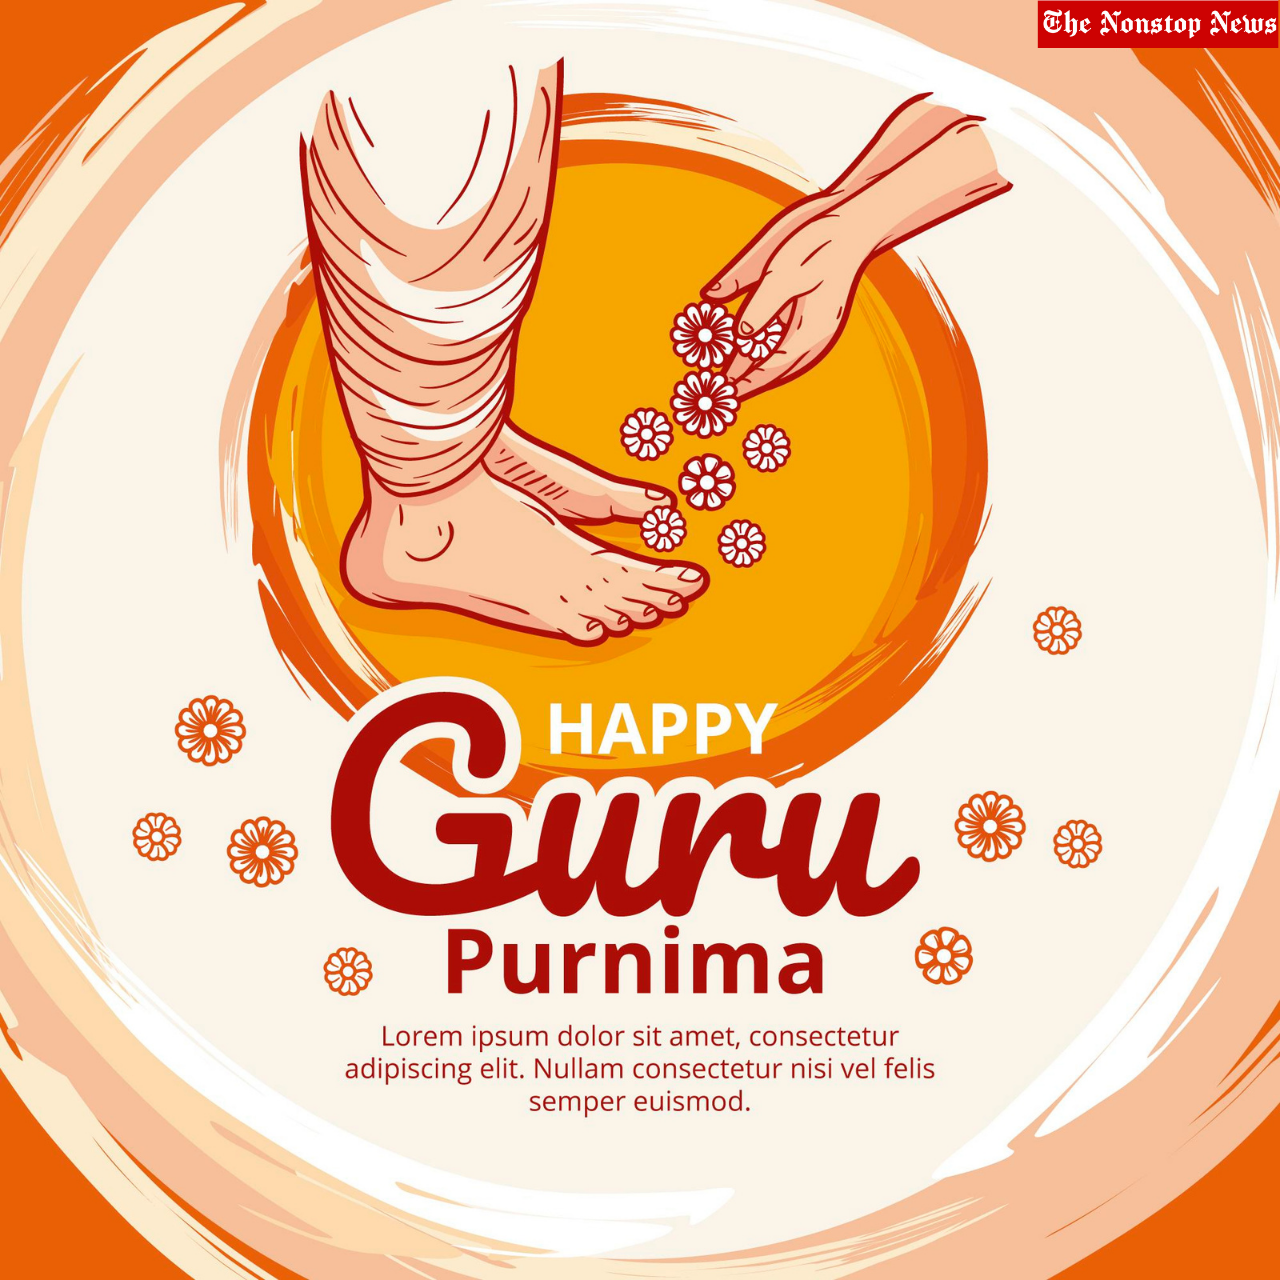 Guru Purnima 2021 Quotes, HD Images, Wishes, Status, Greetings, and Messages to share